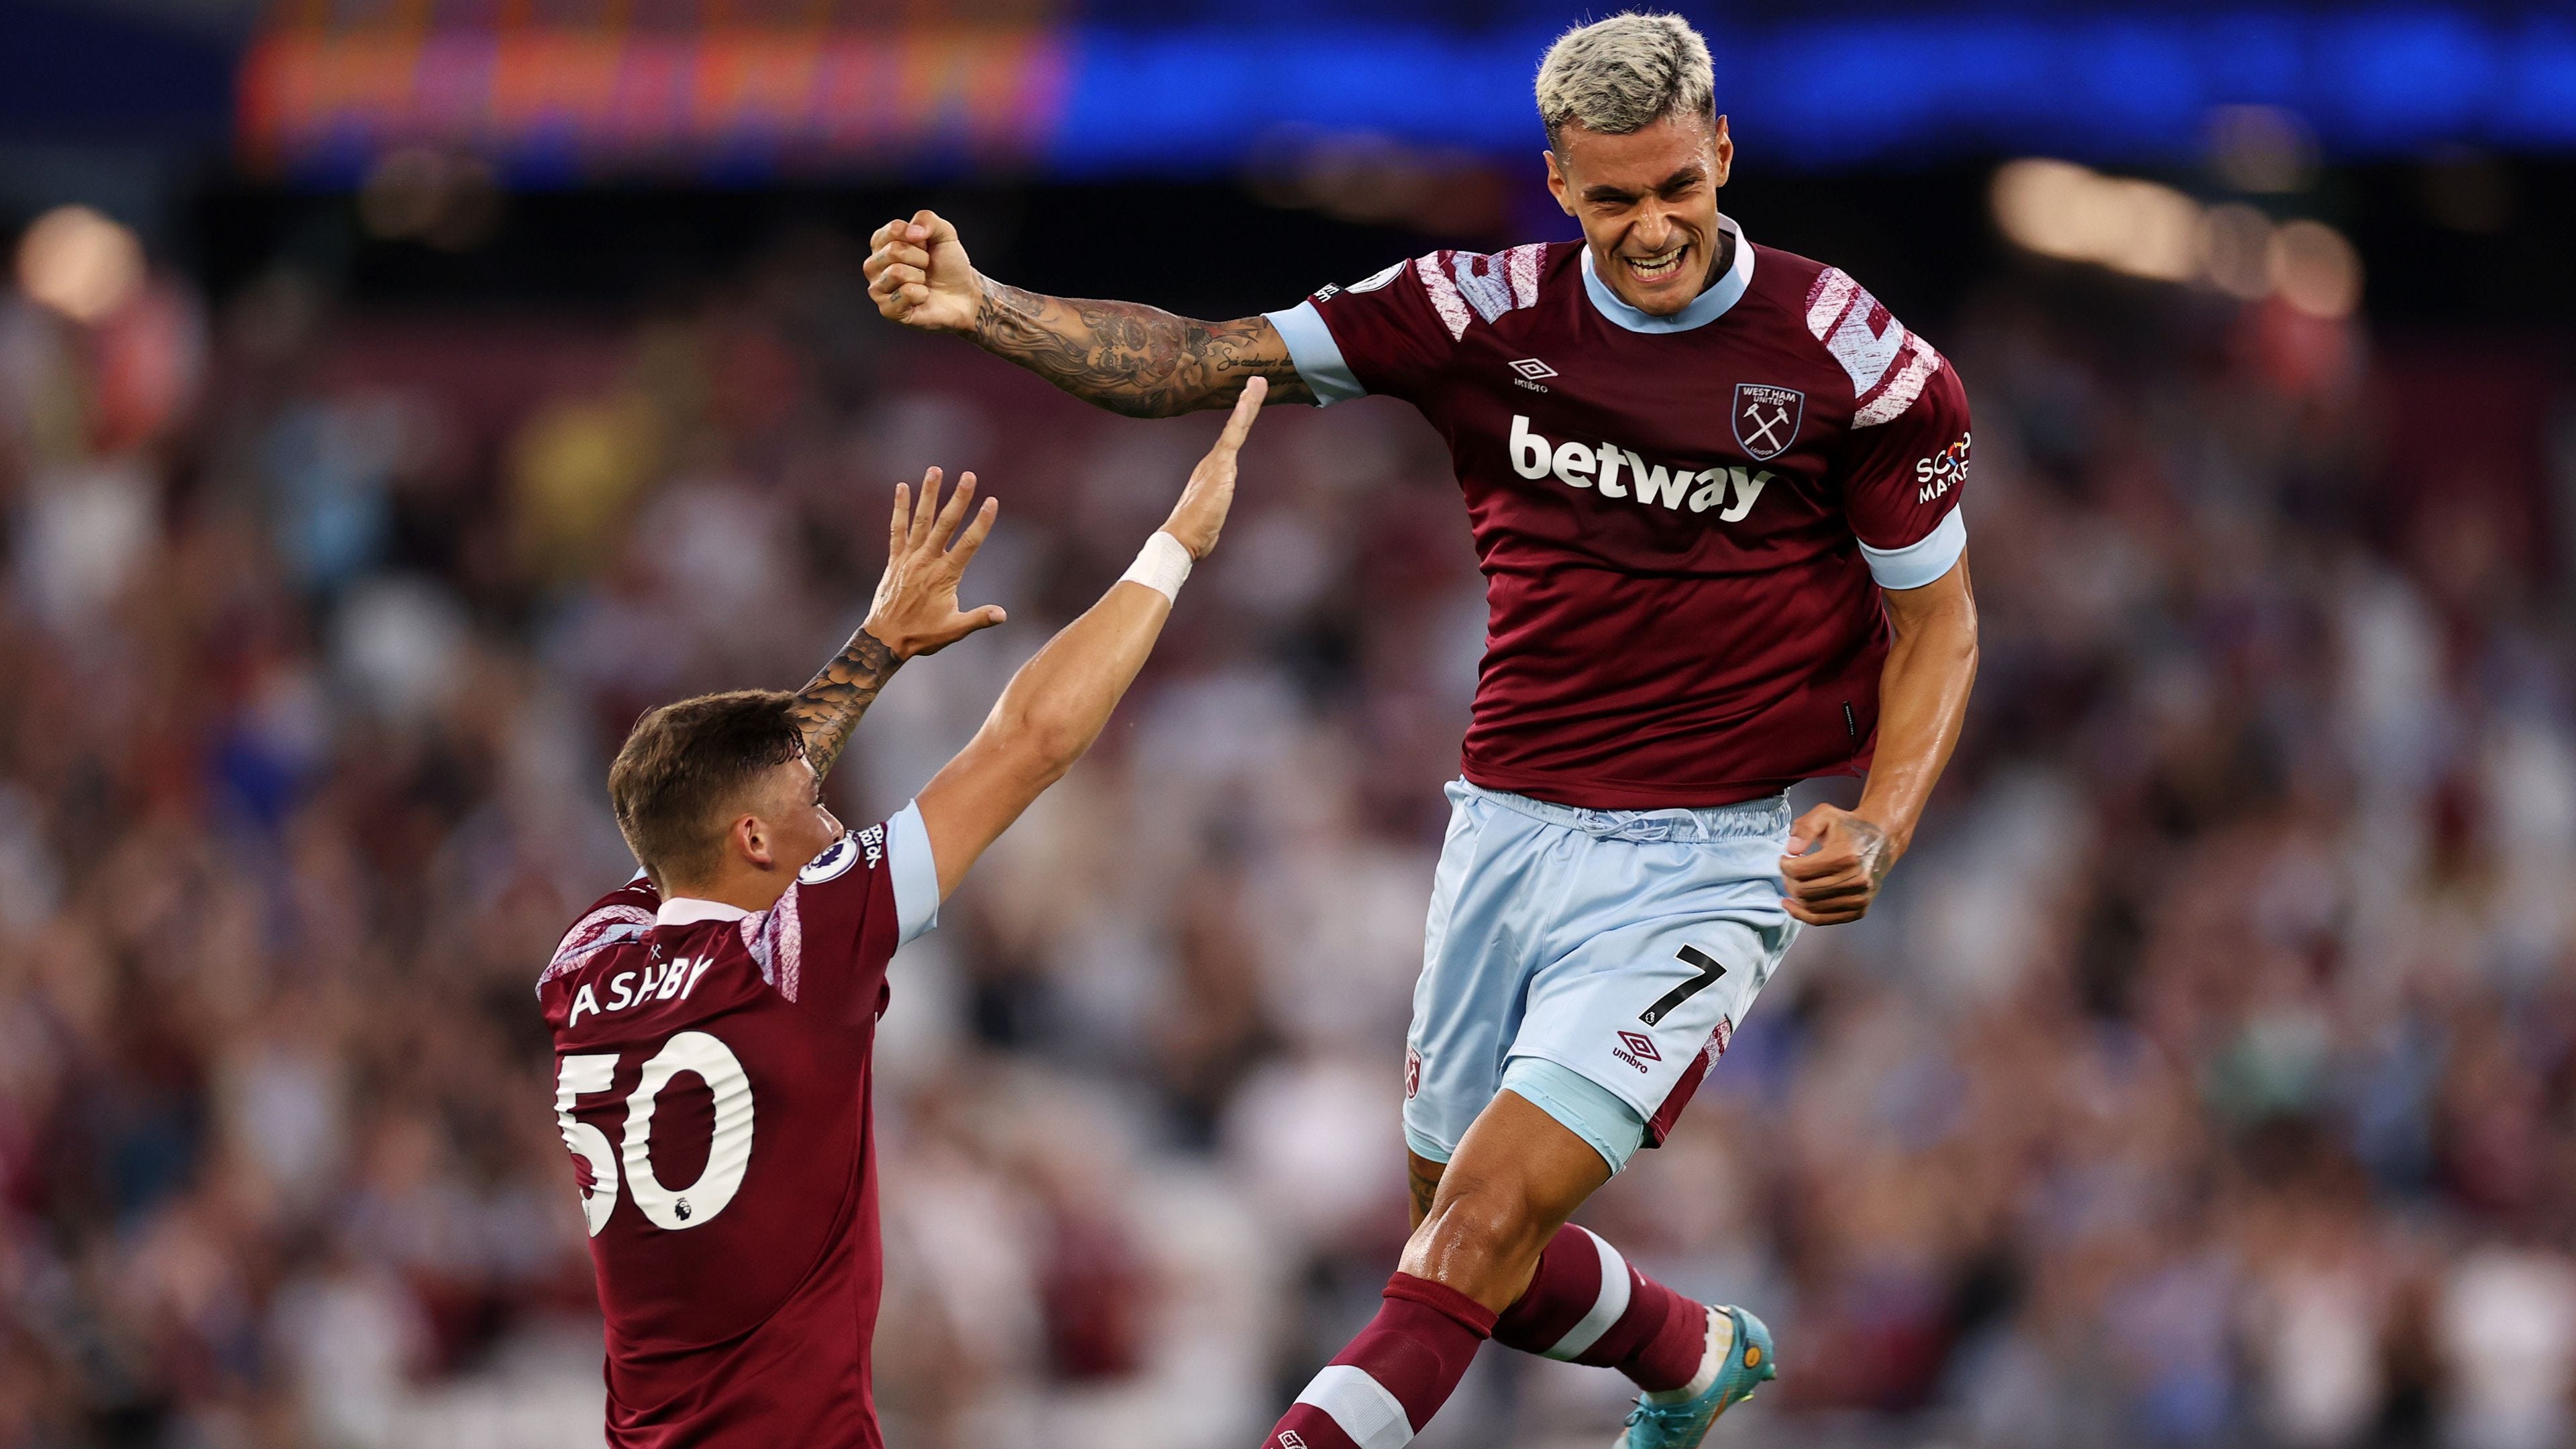 Viborg West Ham: Live stream, TV channel, kick-off time & how to watch | Goal.com US